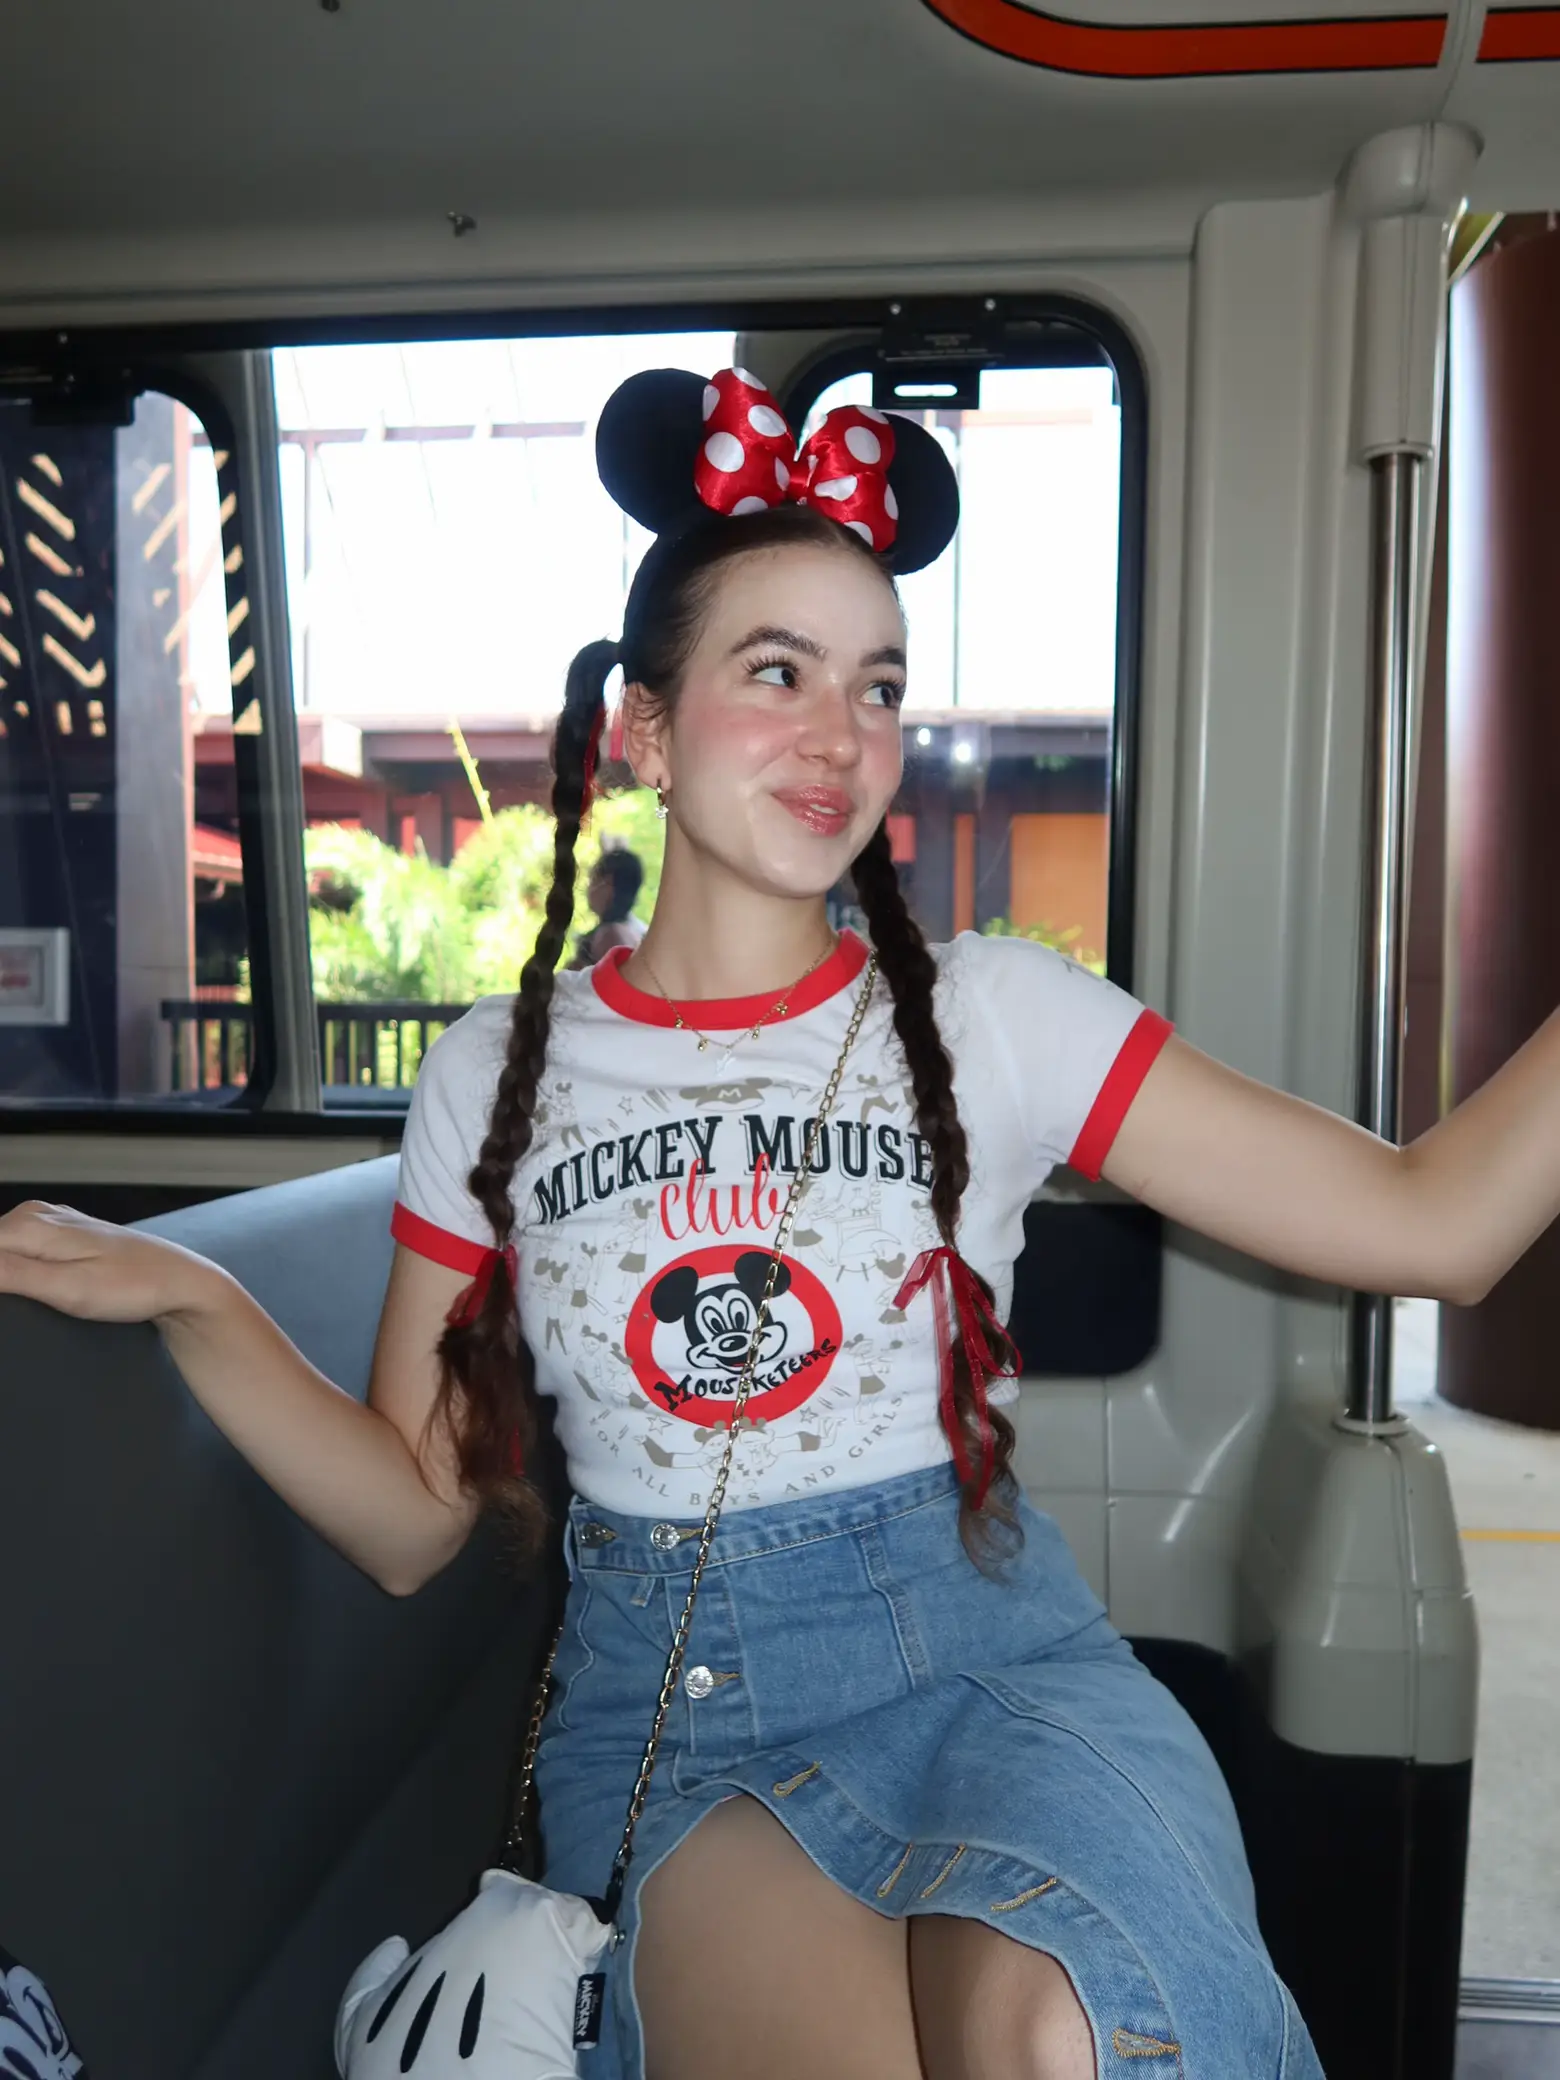  A woman wearing a Mickey Mouse shirt and jeans is sitting on a bench.